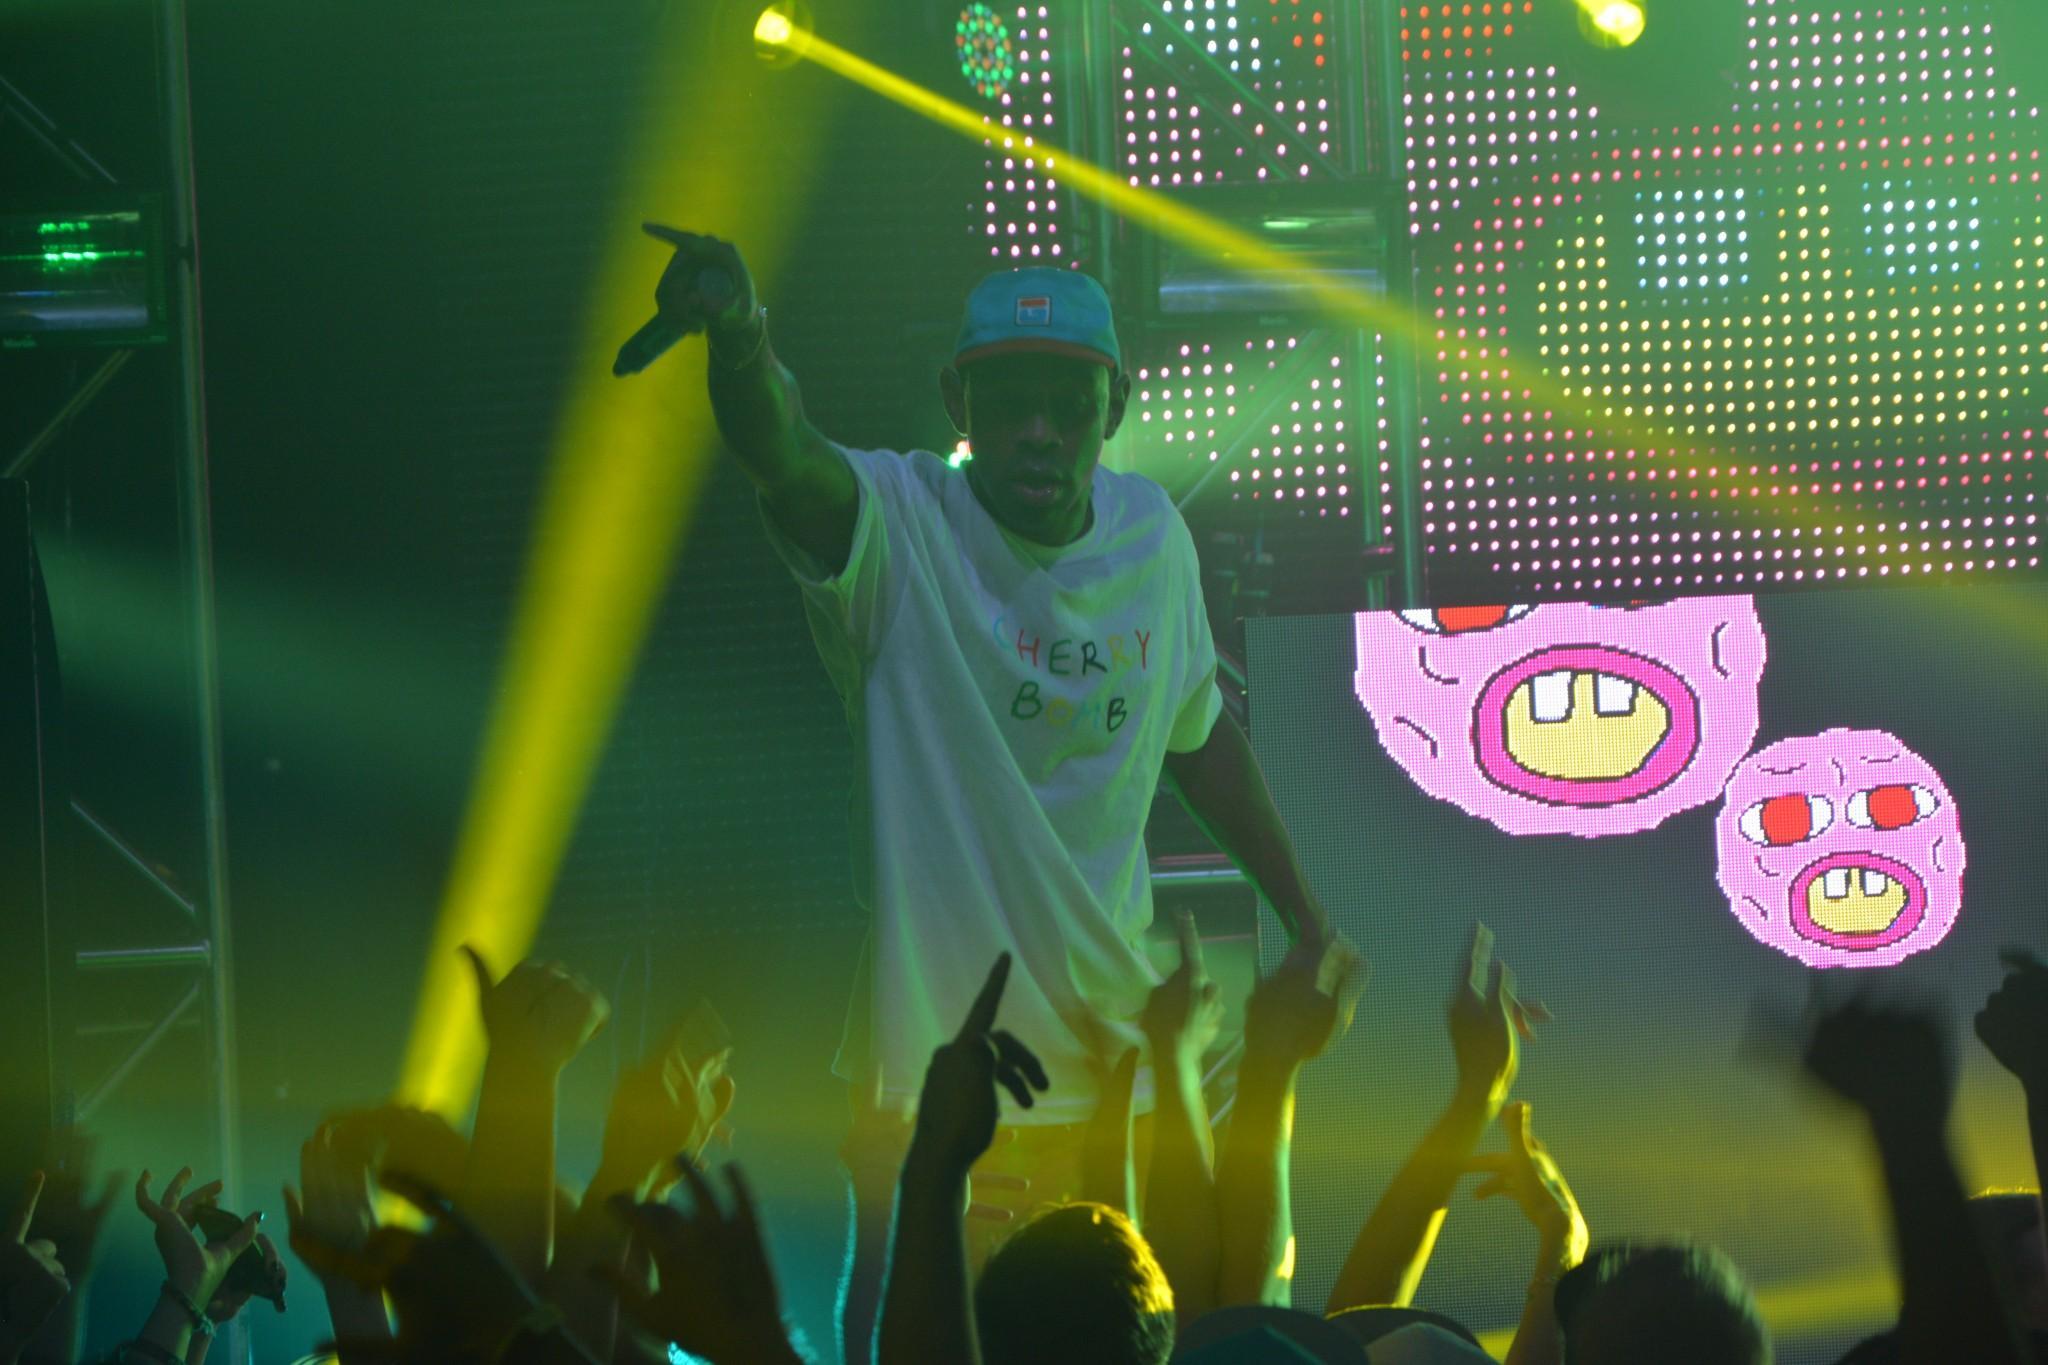 Tyler, the Creator drops a “Cherry Bomb” on Fort Collins